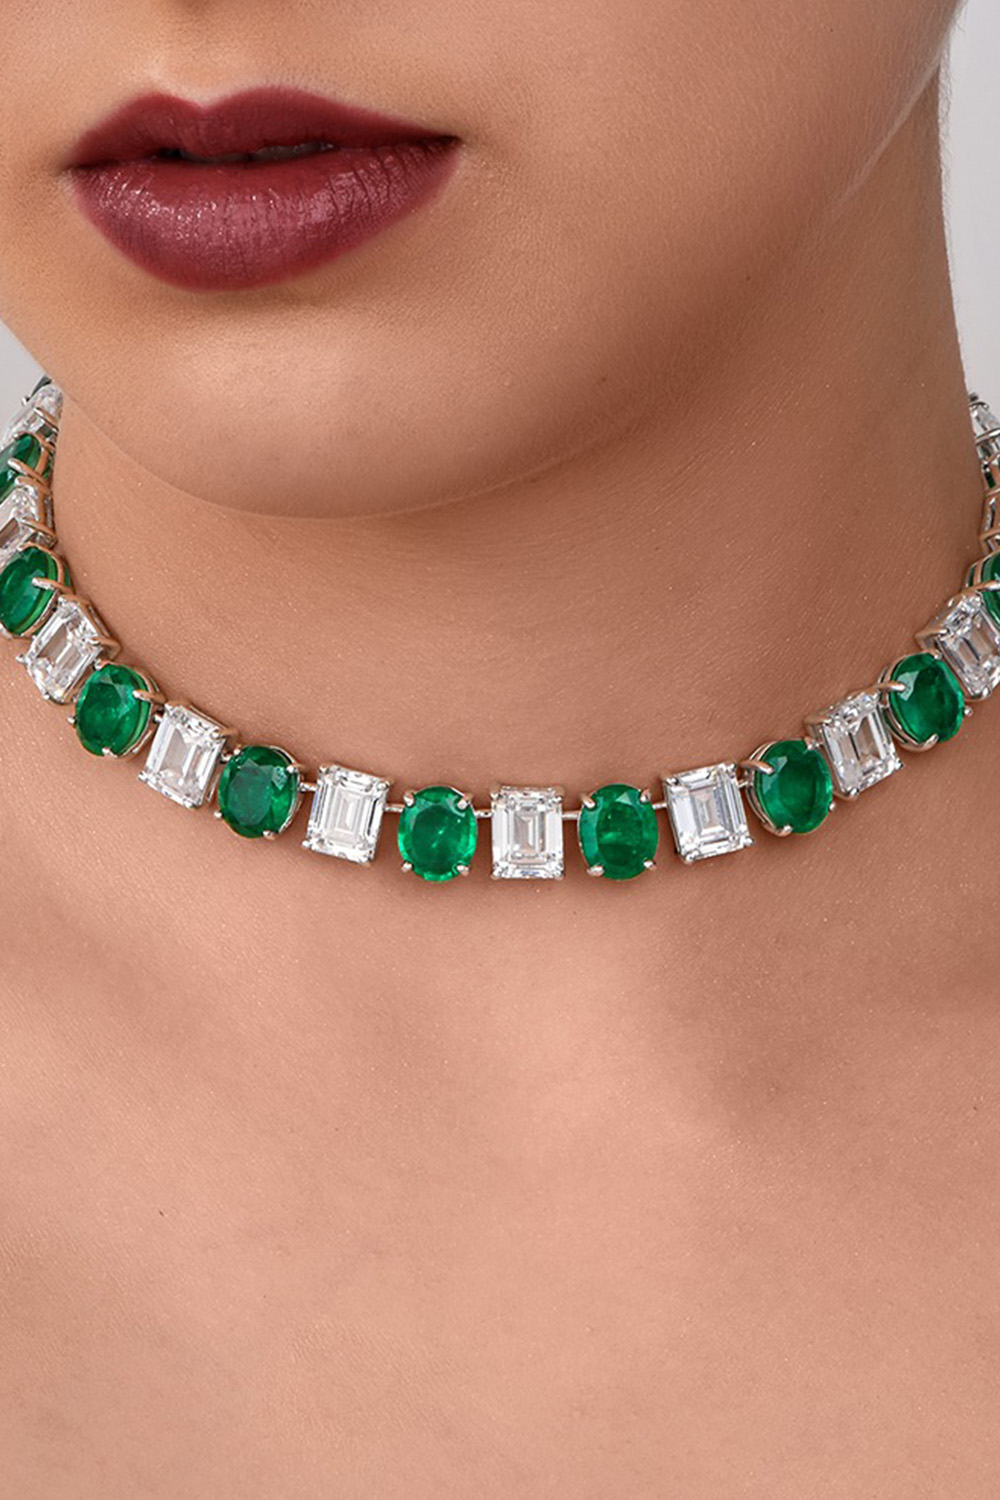 Green And White Choker Necklace